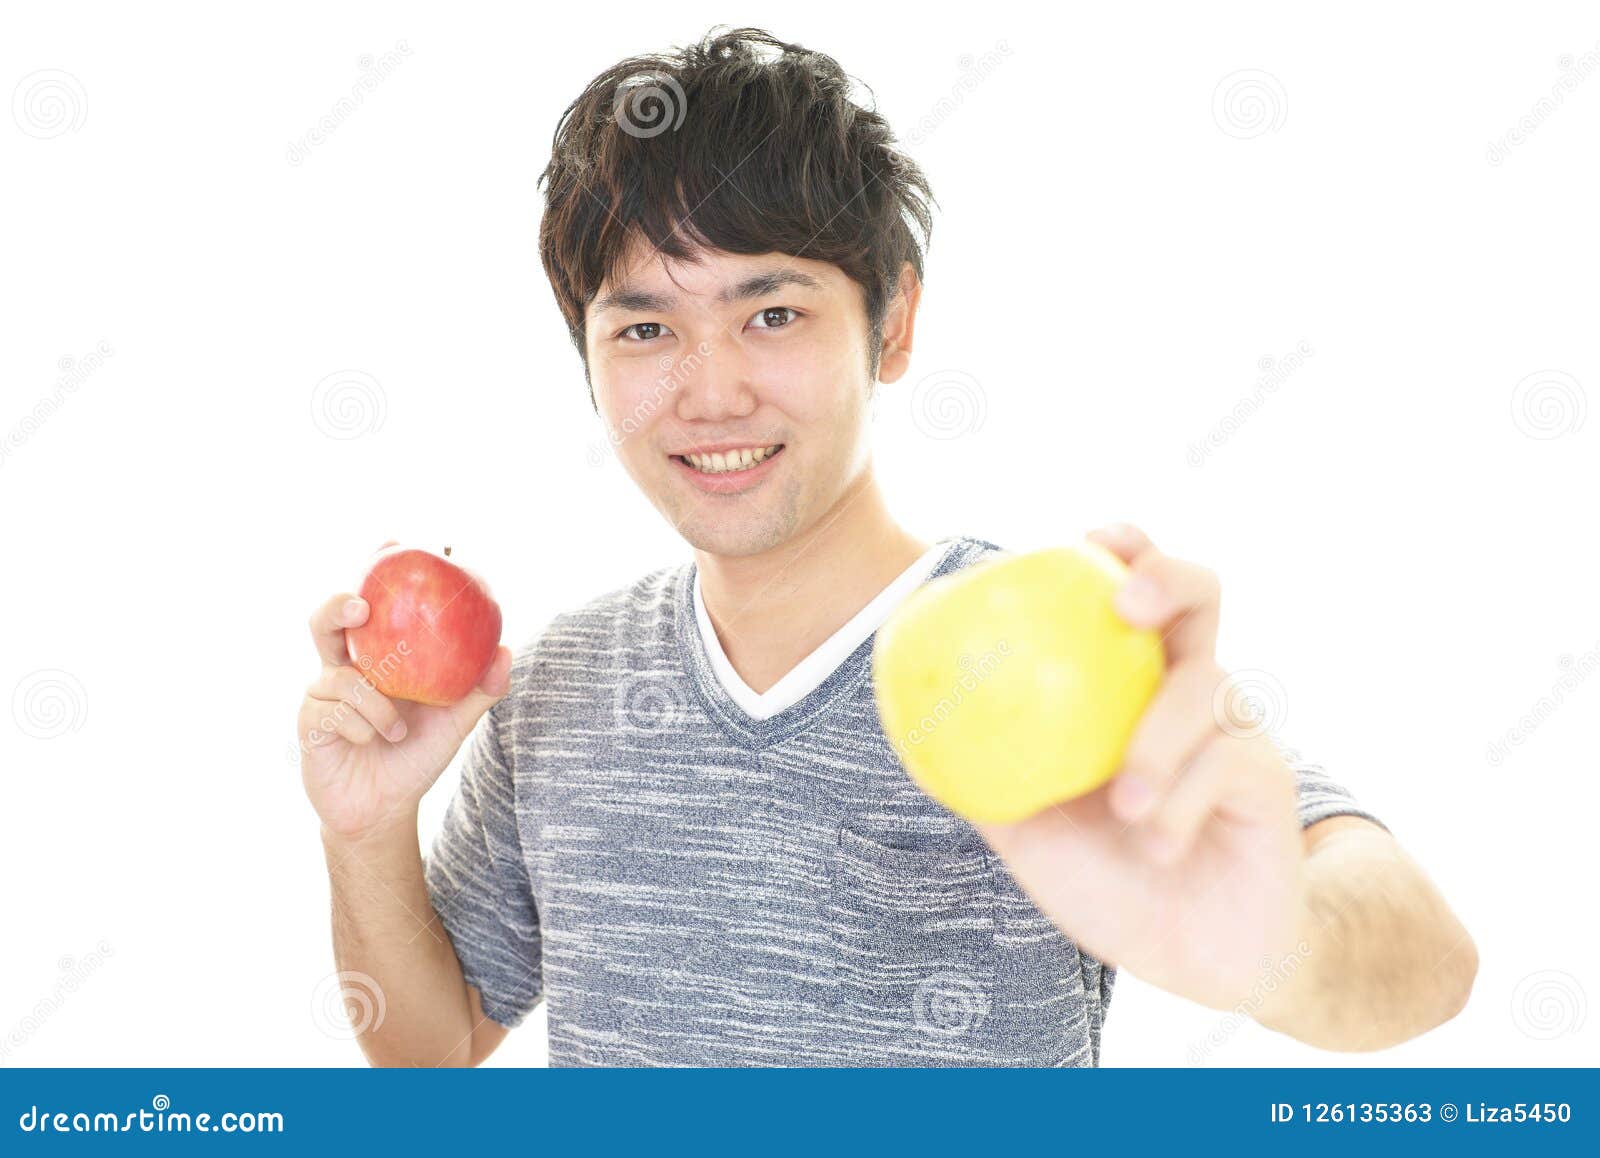 Smiling man with fruits stock image. Image of diet, dessert - 126135363